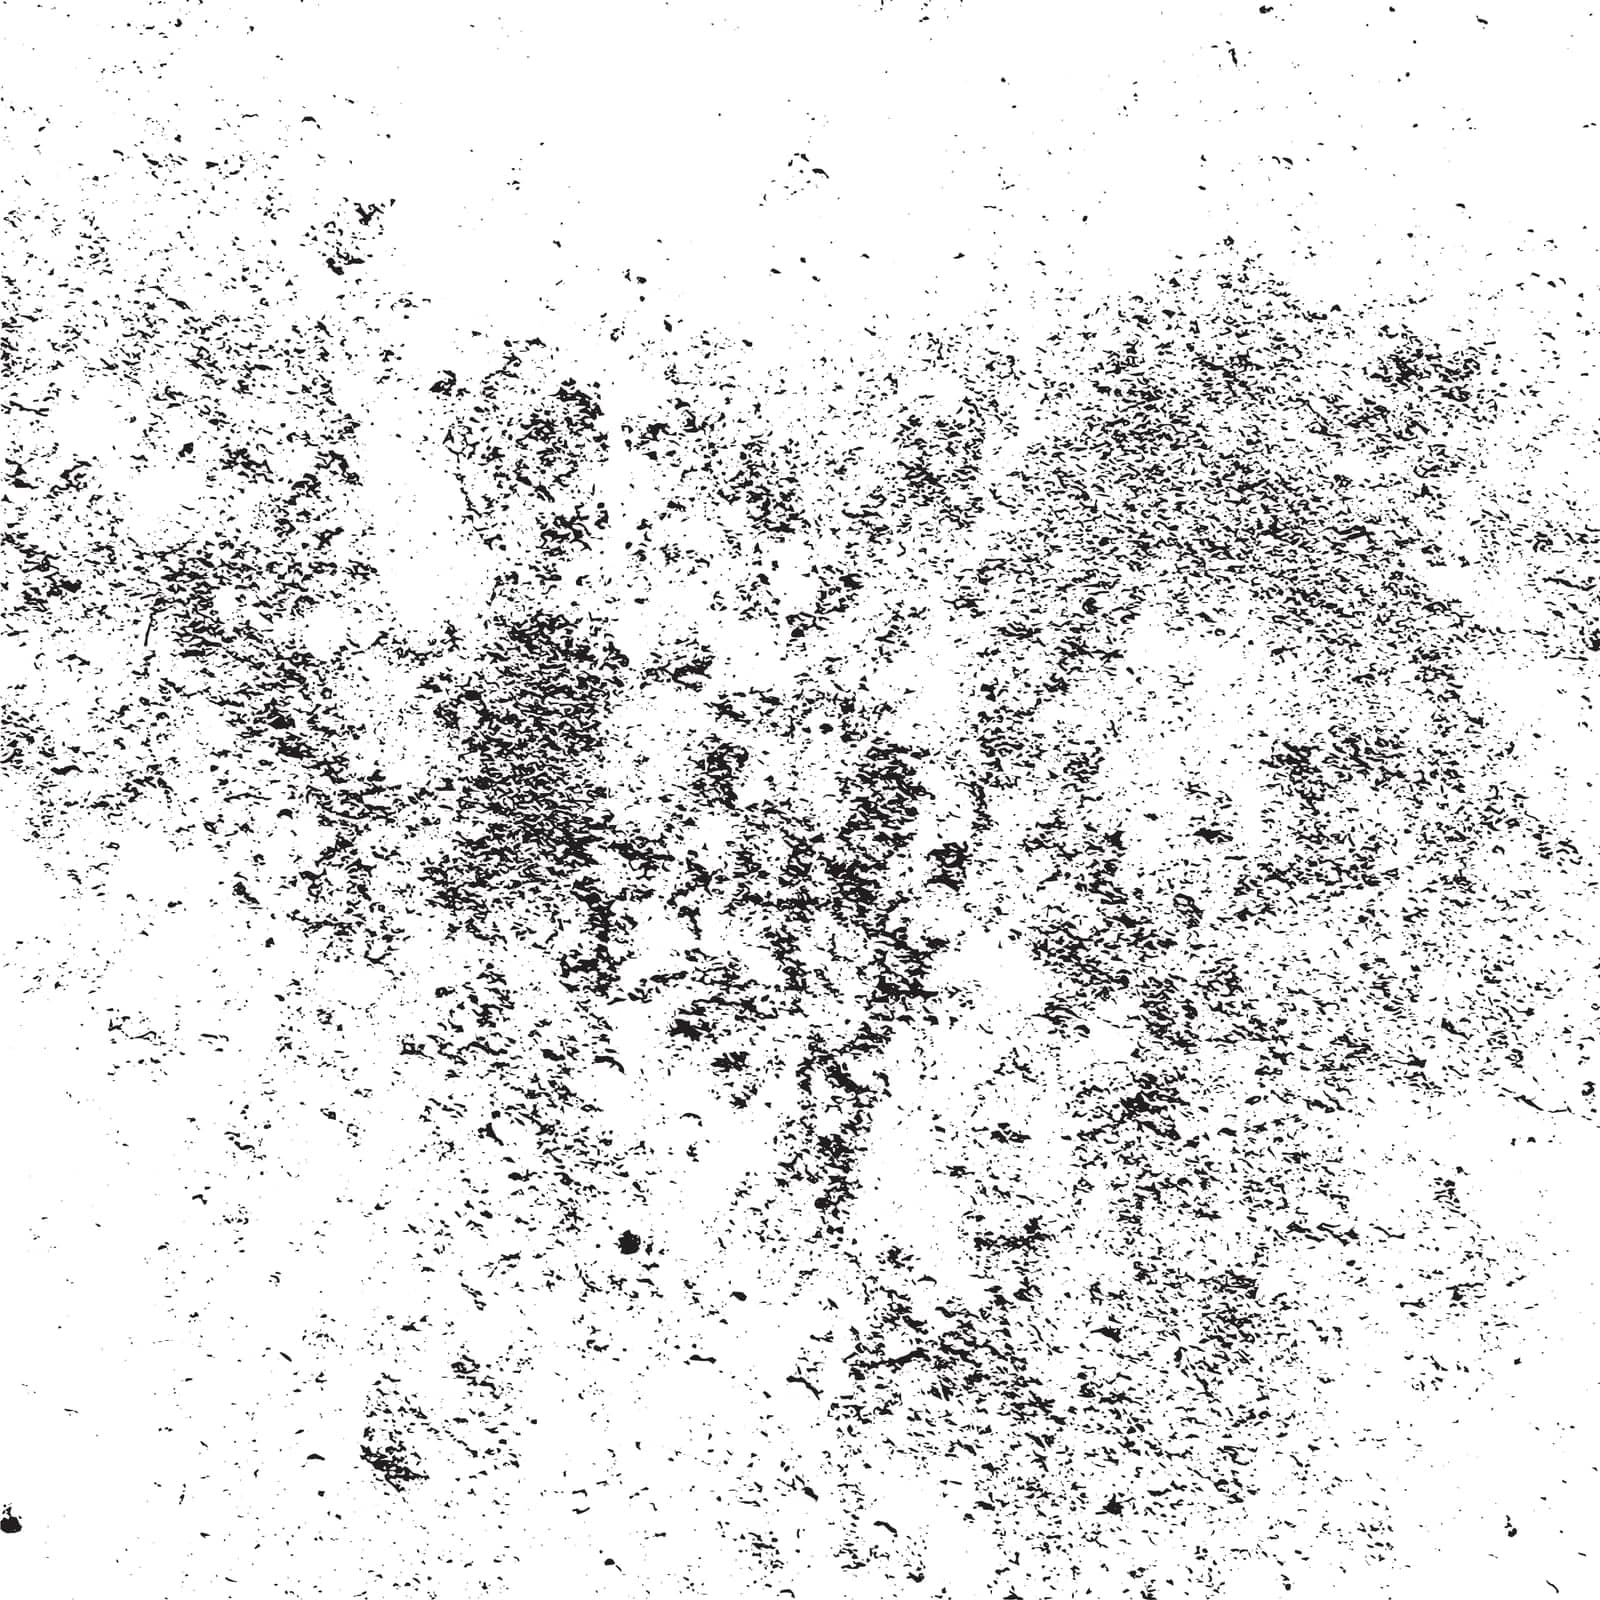 Distress Grainy Dust Overlay Grunge Texture For Your Design. EPS10 vector.